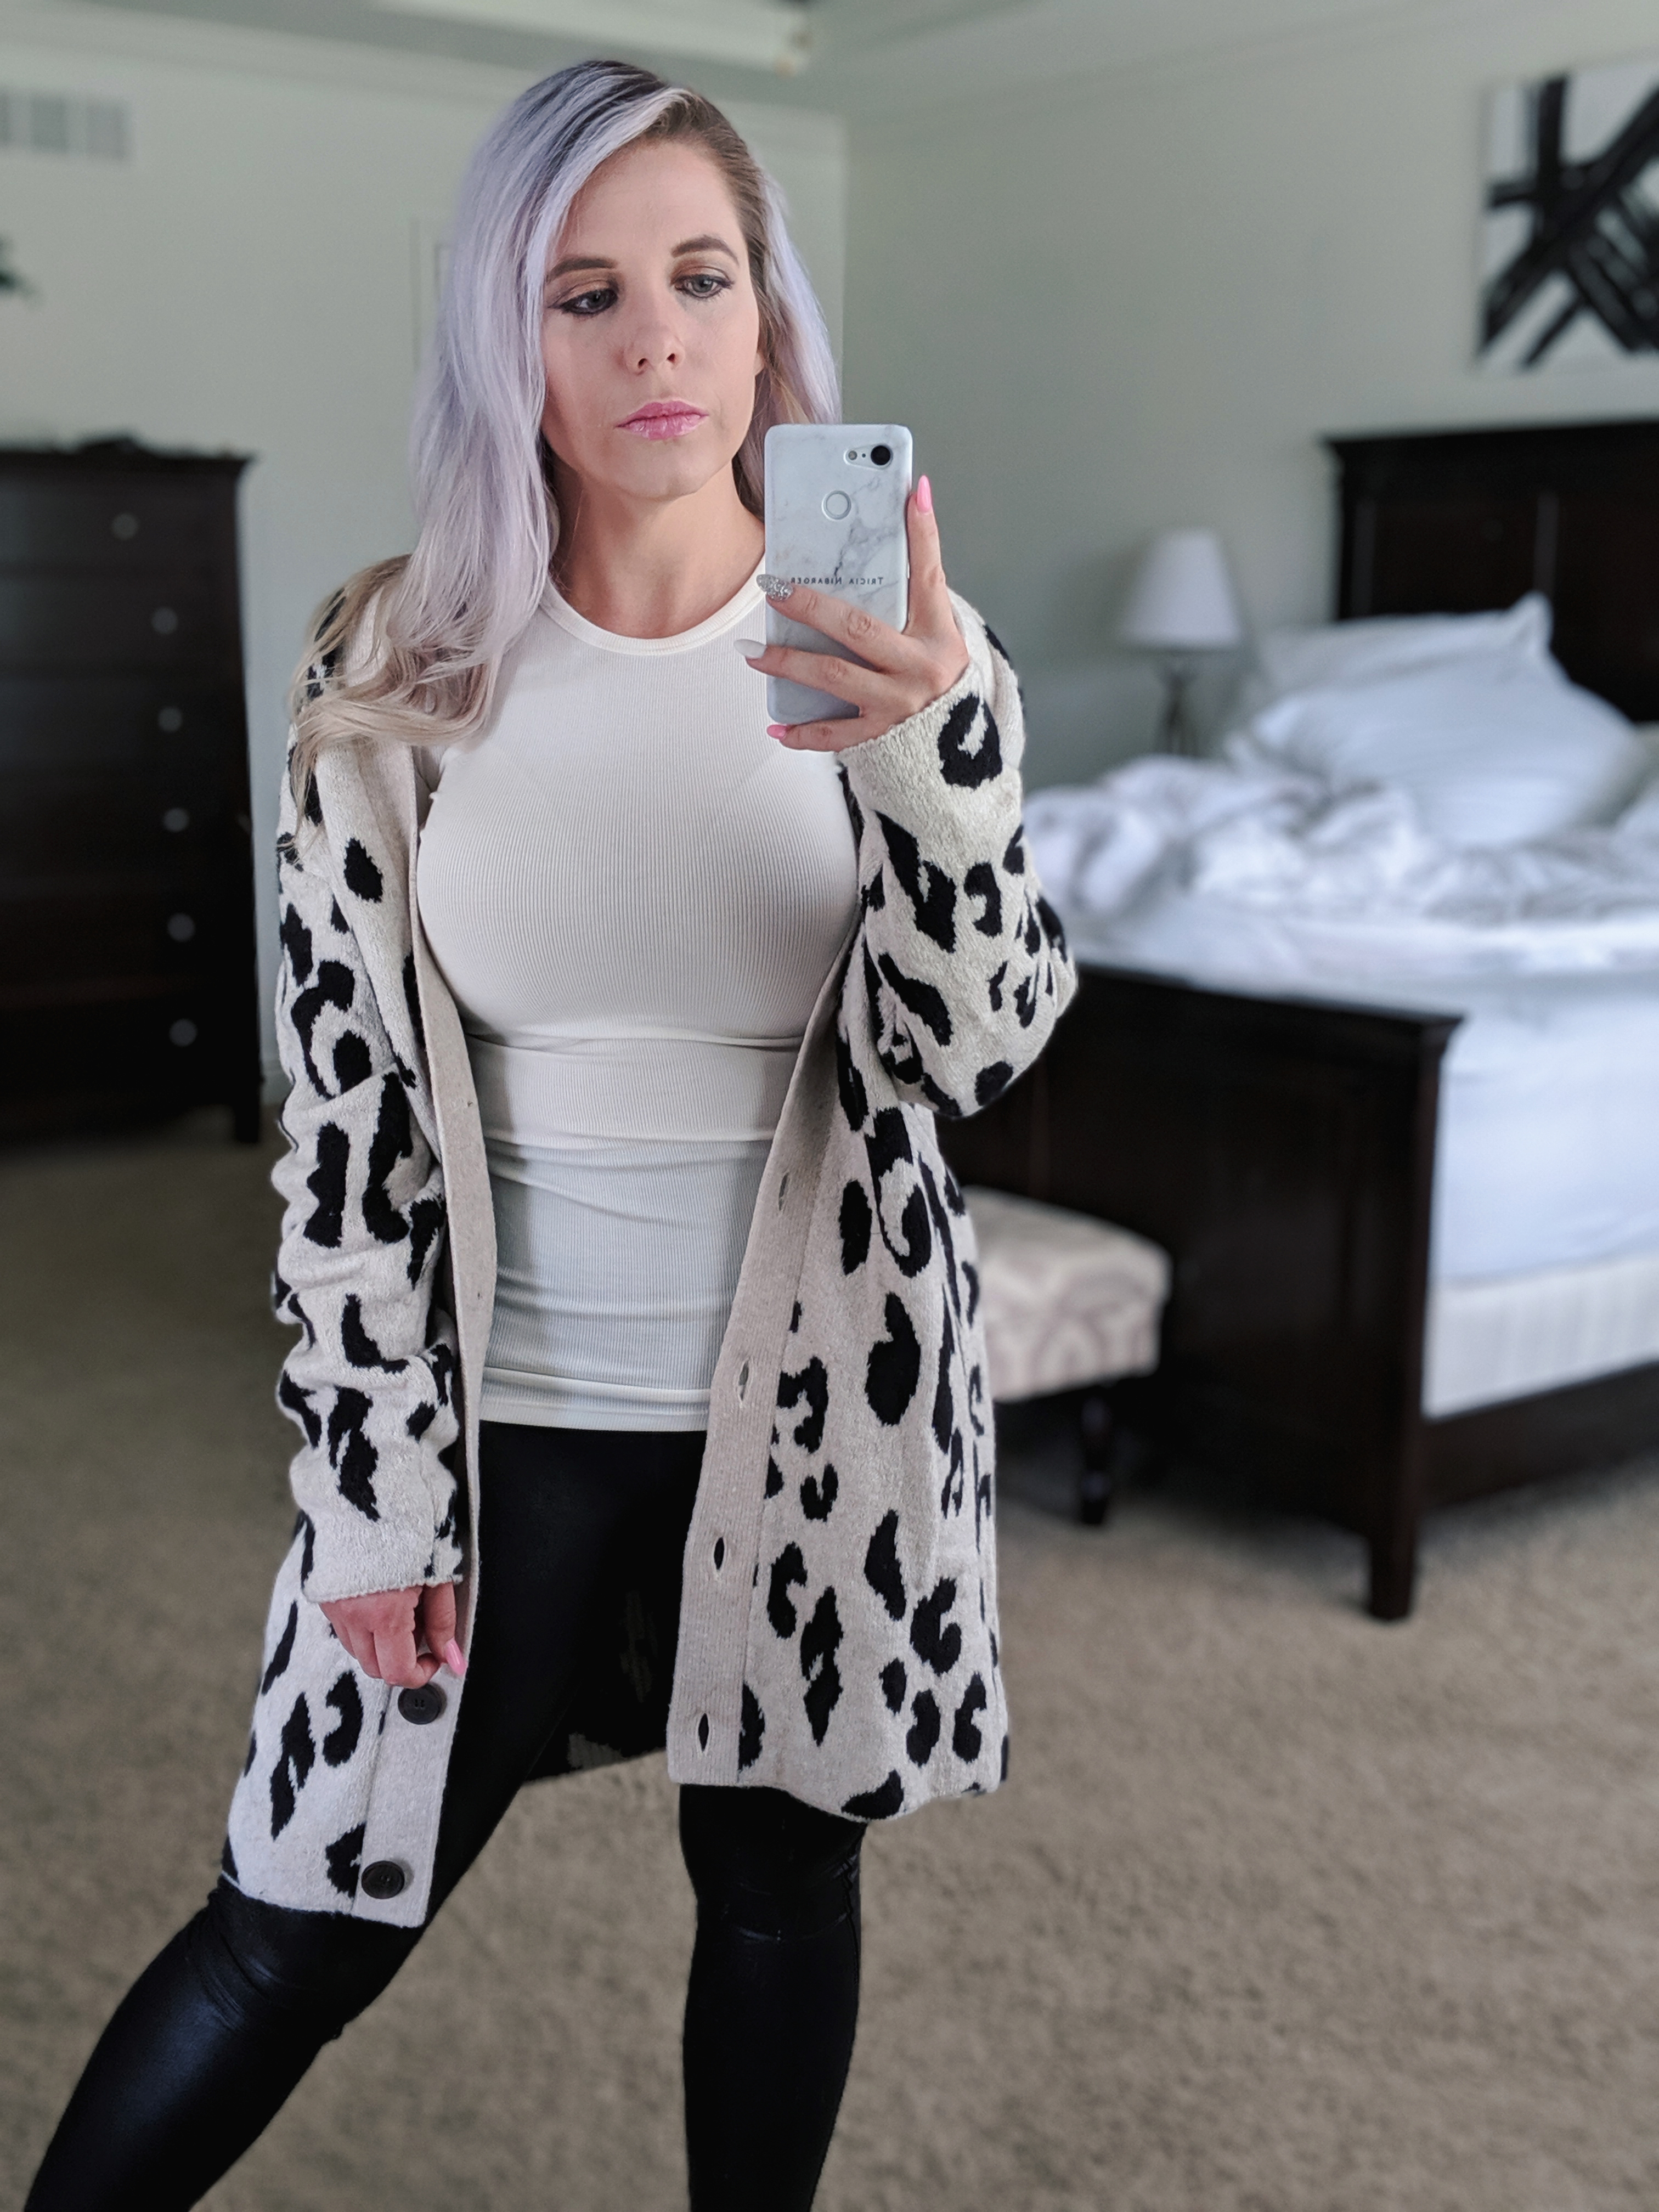 Nordstrom Anniversary Sale Public Access 2019 - NSALE Public Access 2019 Try On Haul. Petite fashion blogger Tricia Nibarger of COVET by tricia showcases top Nordstrom Anniversary Sale blogger picks. #NSALE #Nordstrom #LikeTKit